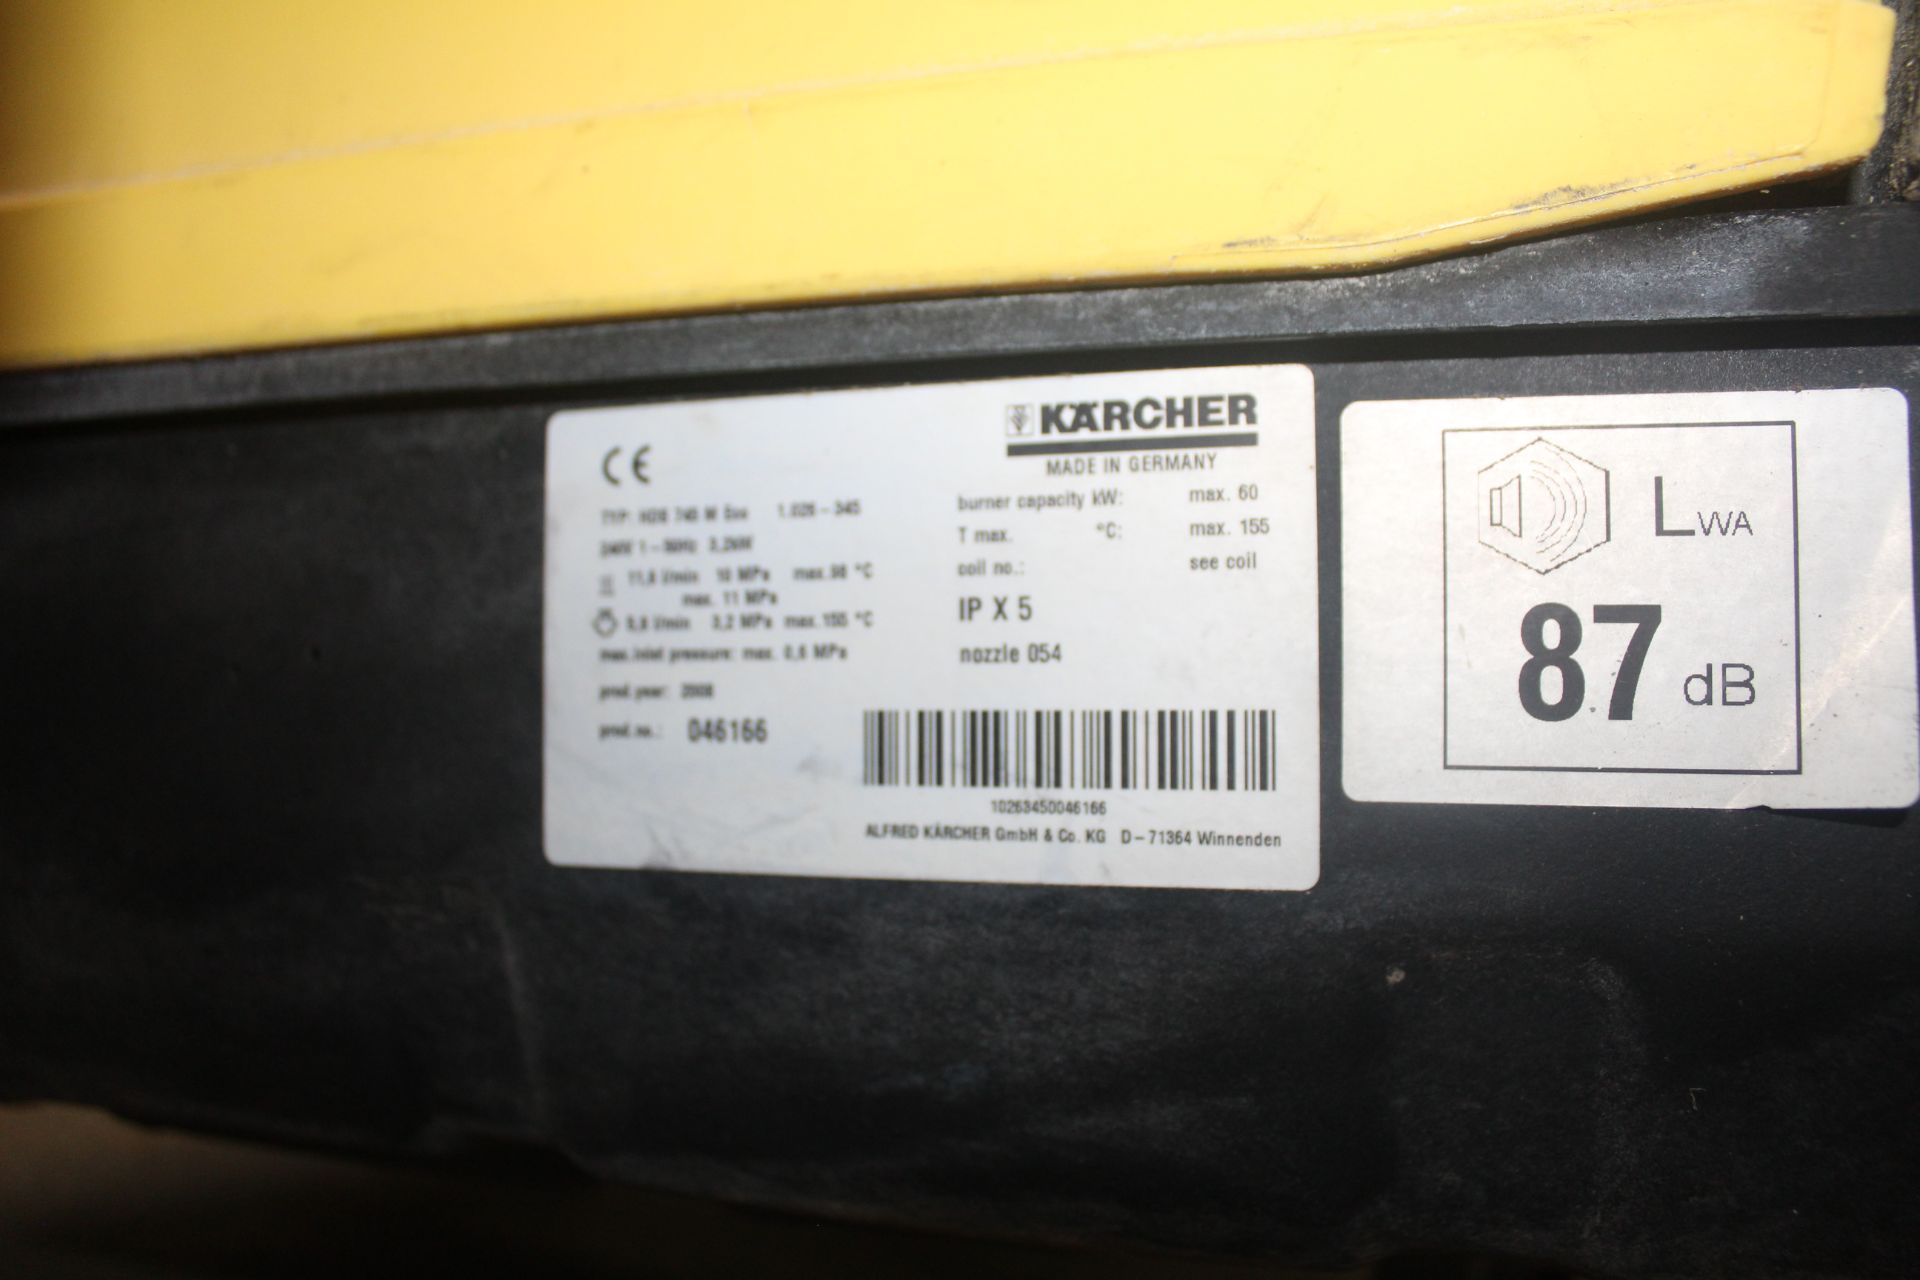 Karcher steam cleaner. With long hose. Recently serviced. Manual held. - Image 16 of 17